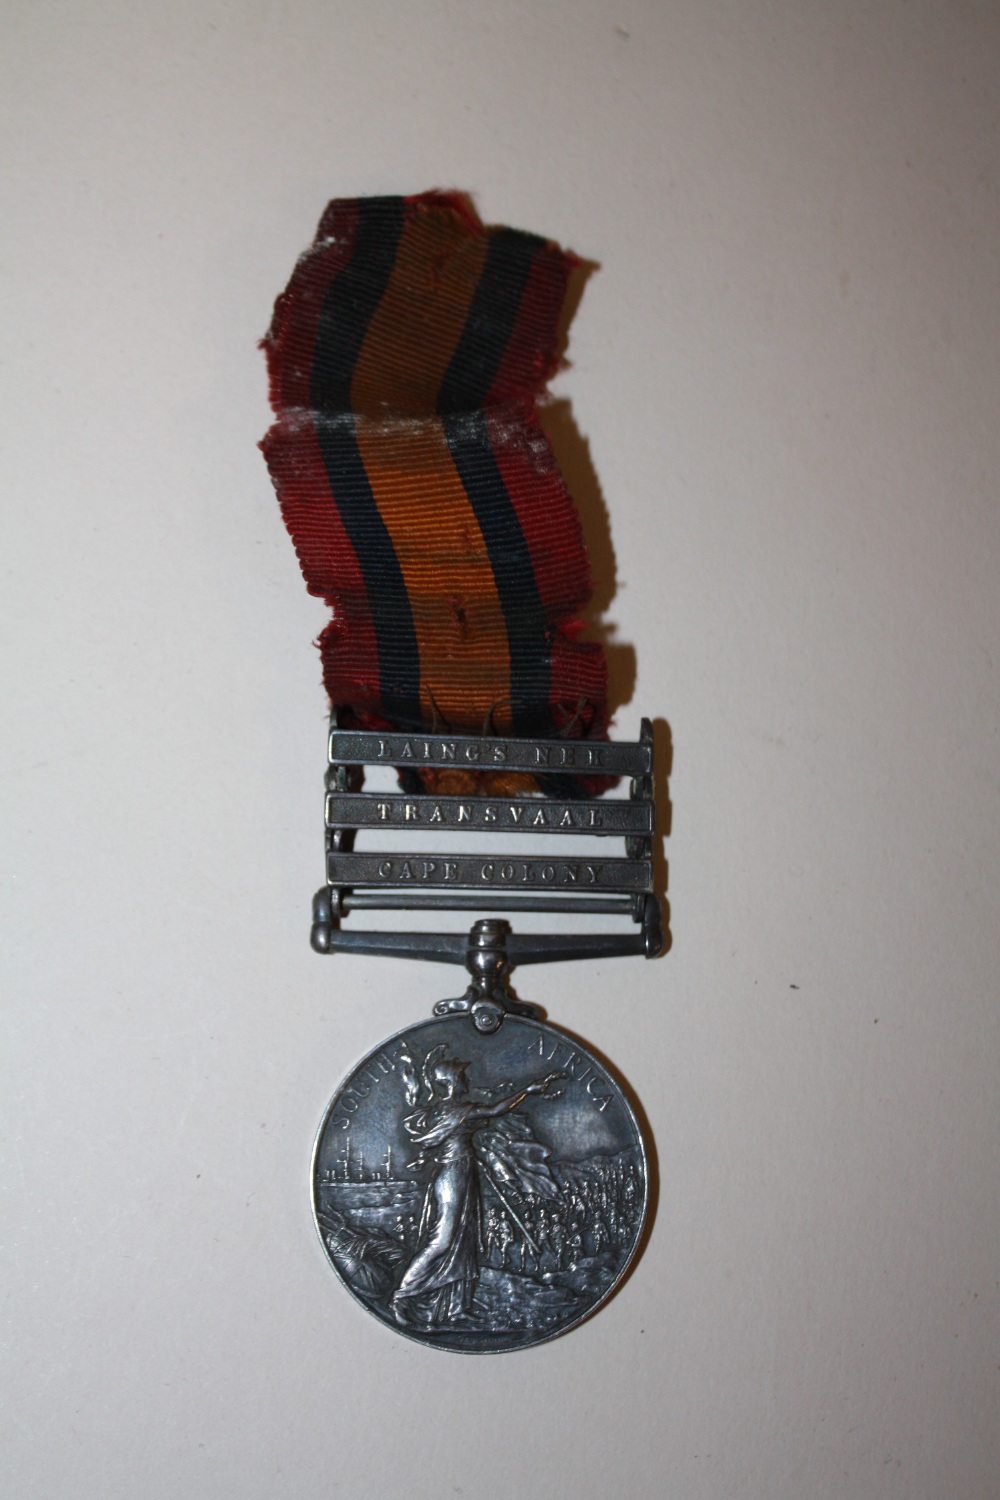 A SOUTH AFRICAN WAR MEDAL AWARDED TO 1424 PTE J. LITTON I..LEIC..REGT